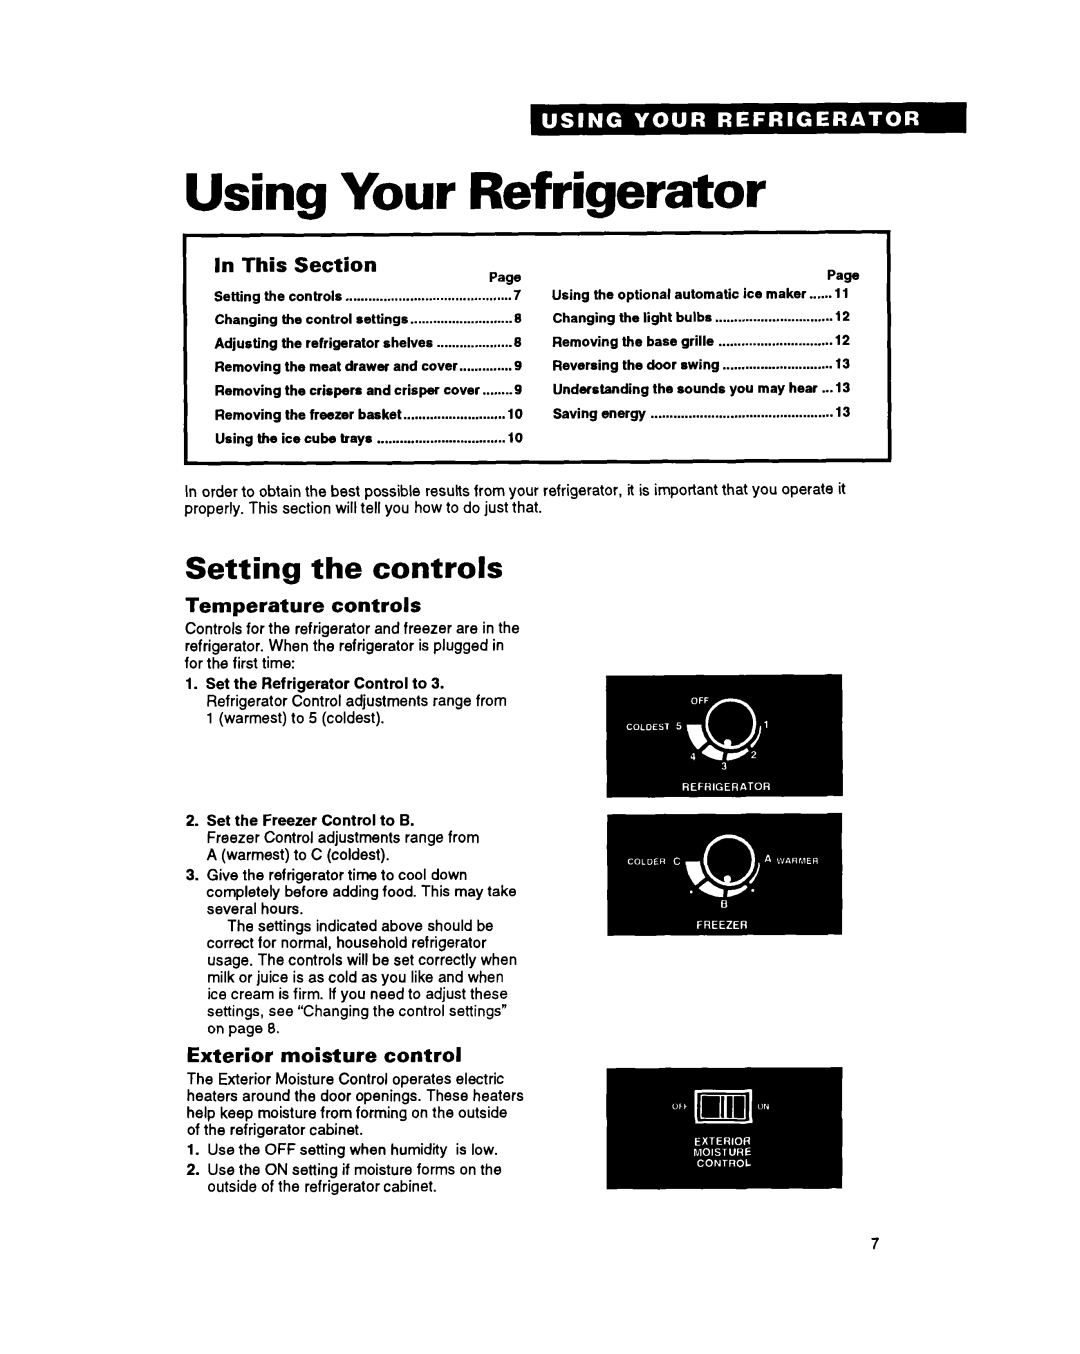 Whirlpool RBZICK Using Your Refrigerator, Setting the controls, In This, Section, Temperature controls 